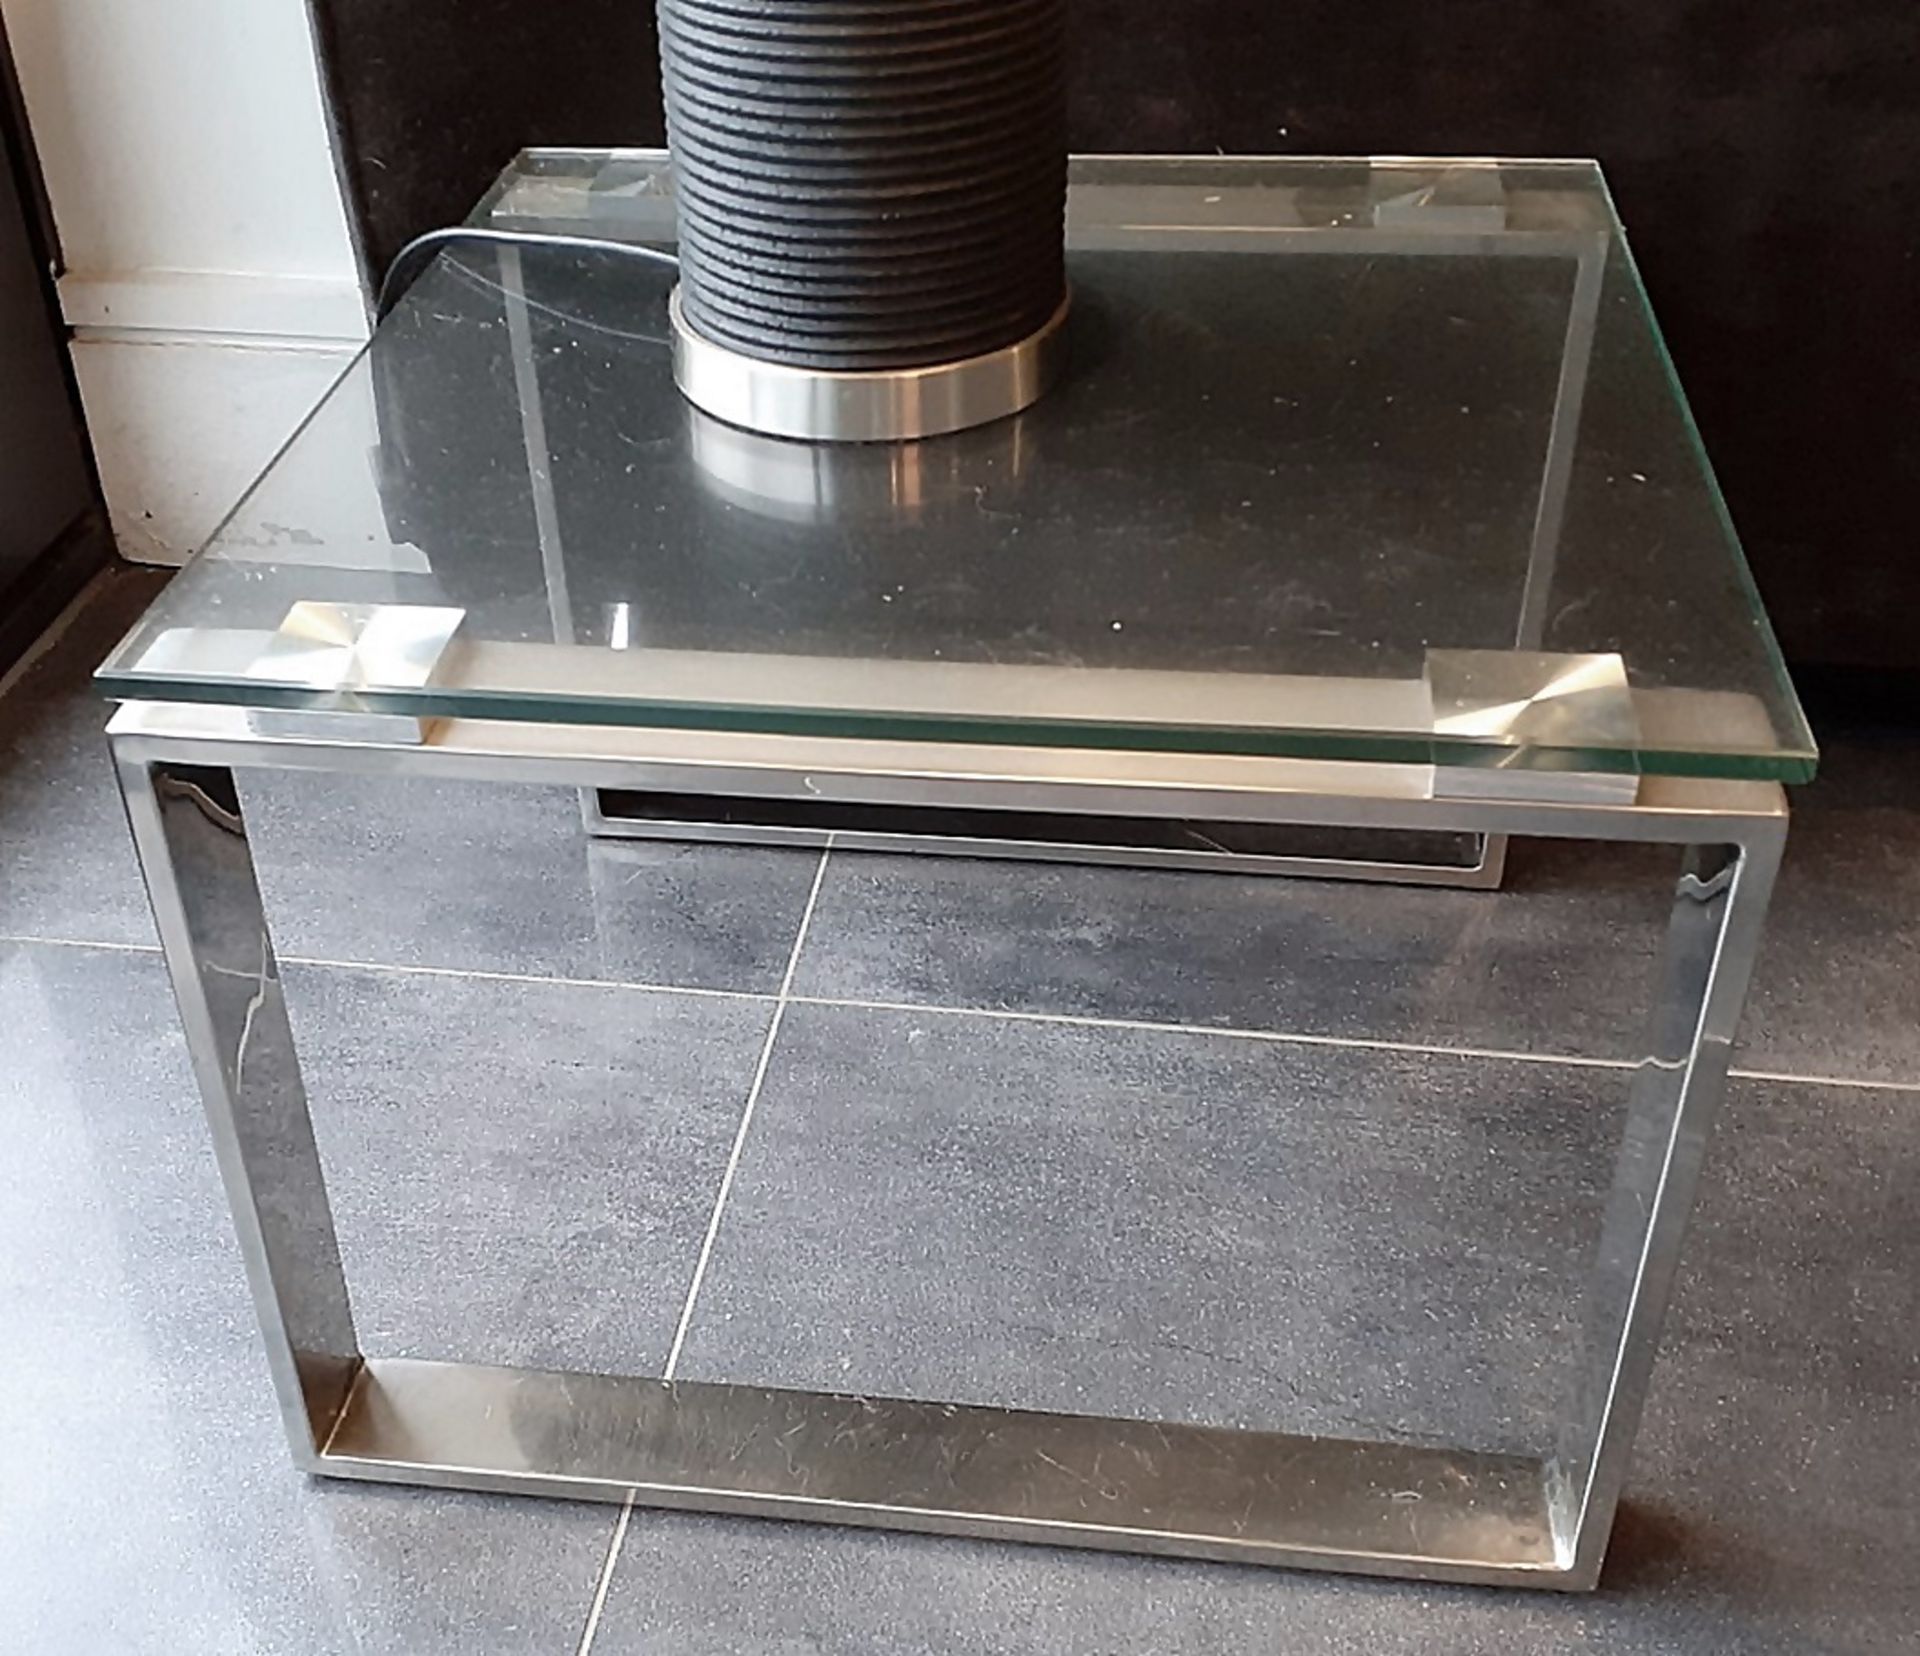 1 x Glass Topped Lamp Table With A Chromed Base - Dimensions: 45 x 45 x H34cm - Preowned - NO VAT - Image 2 of 3